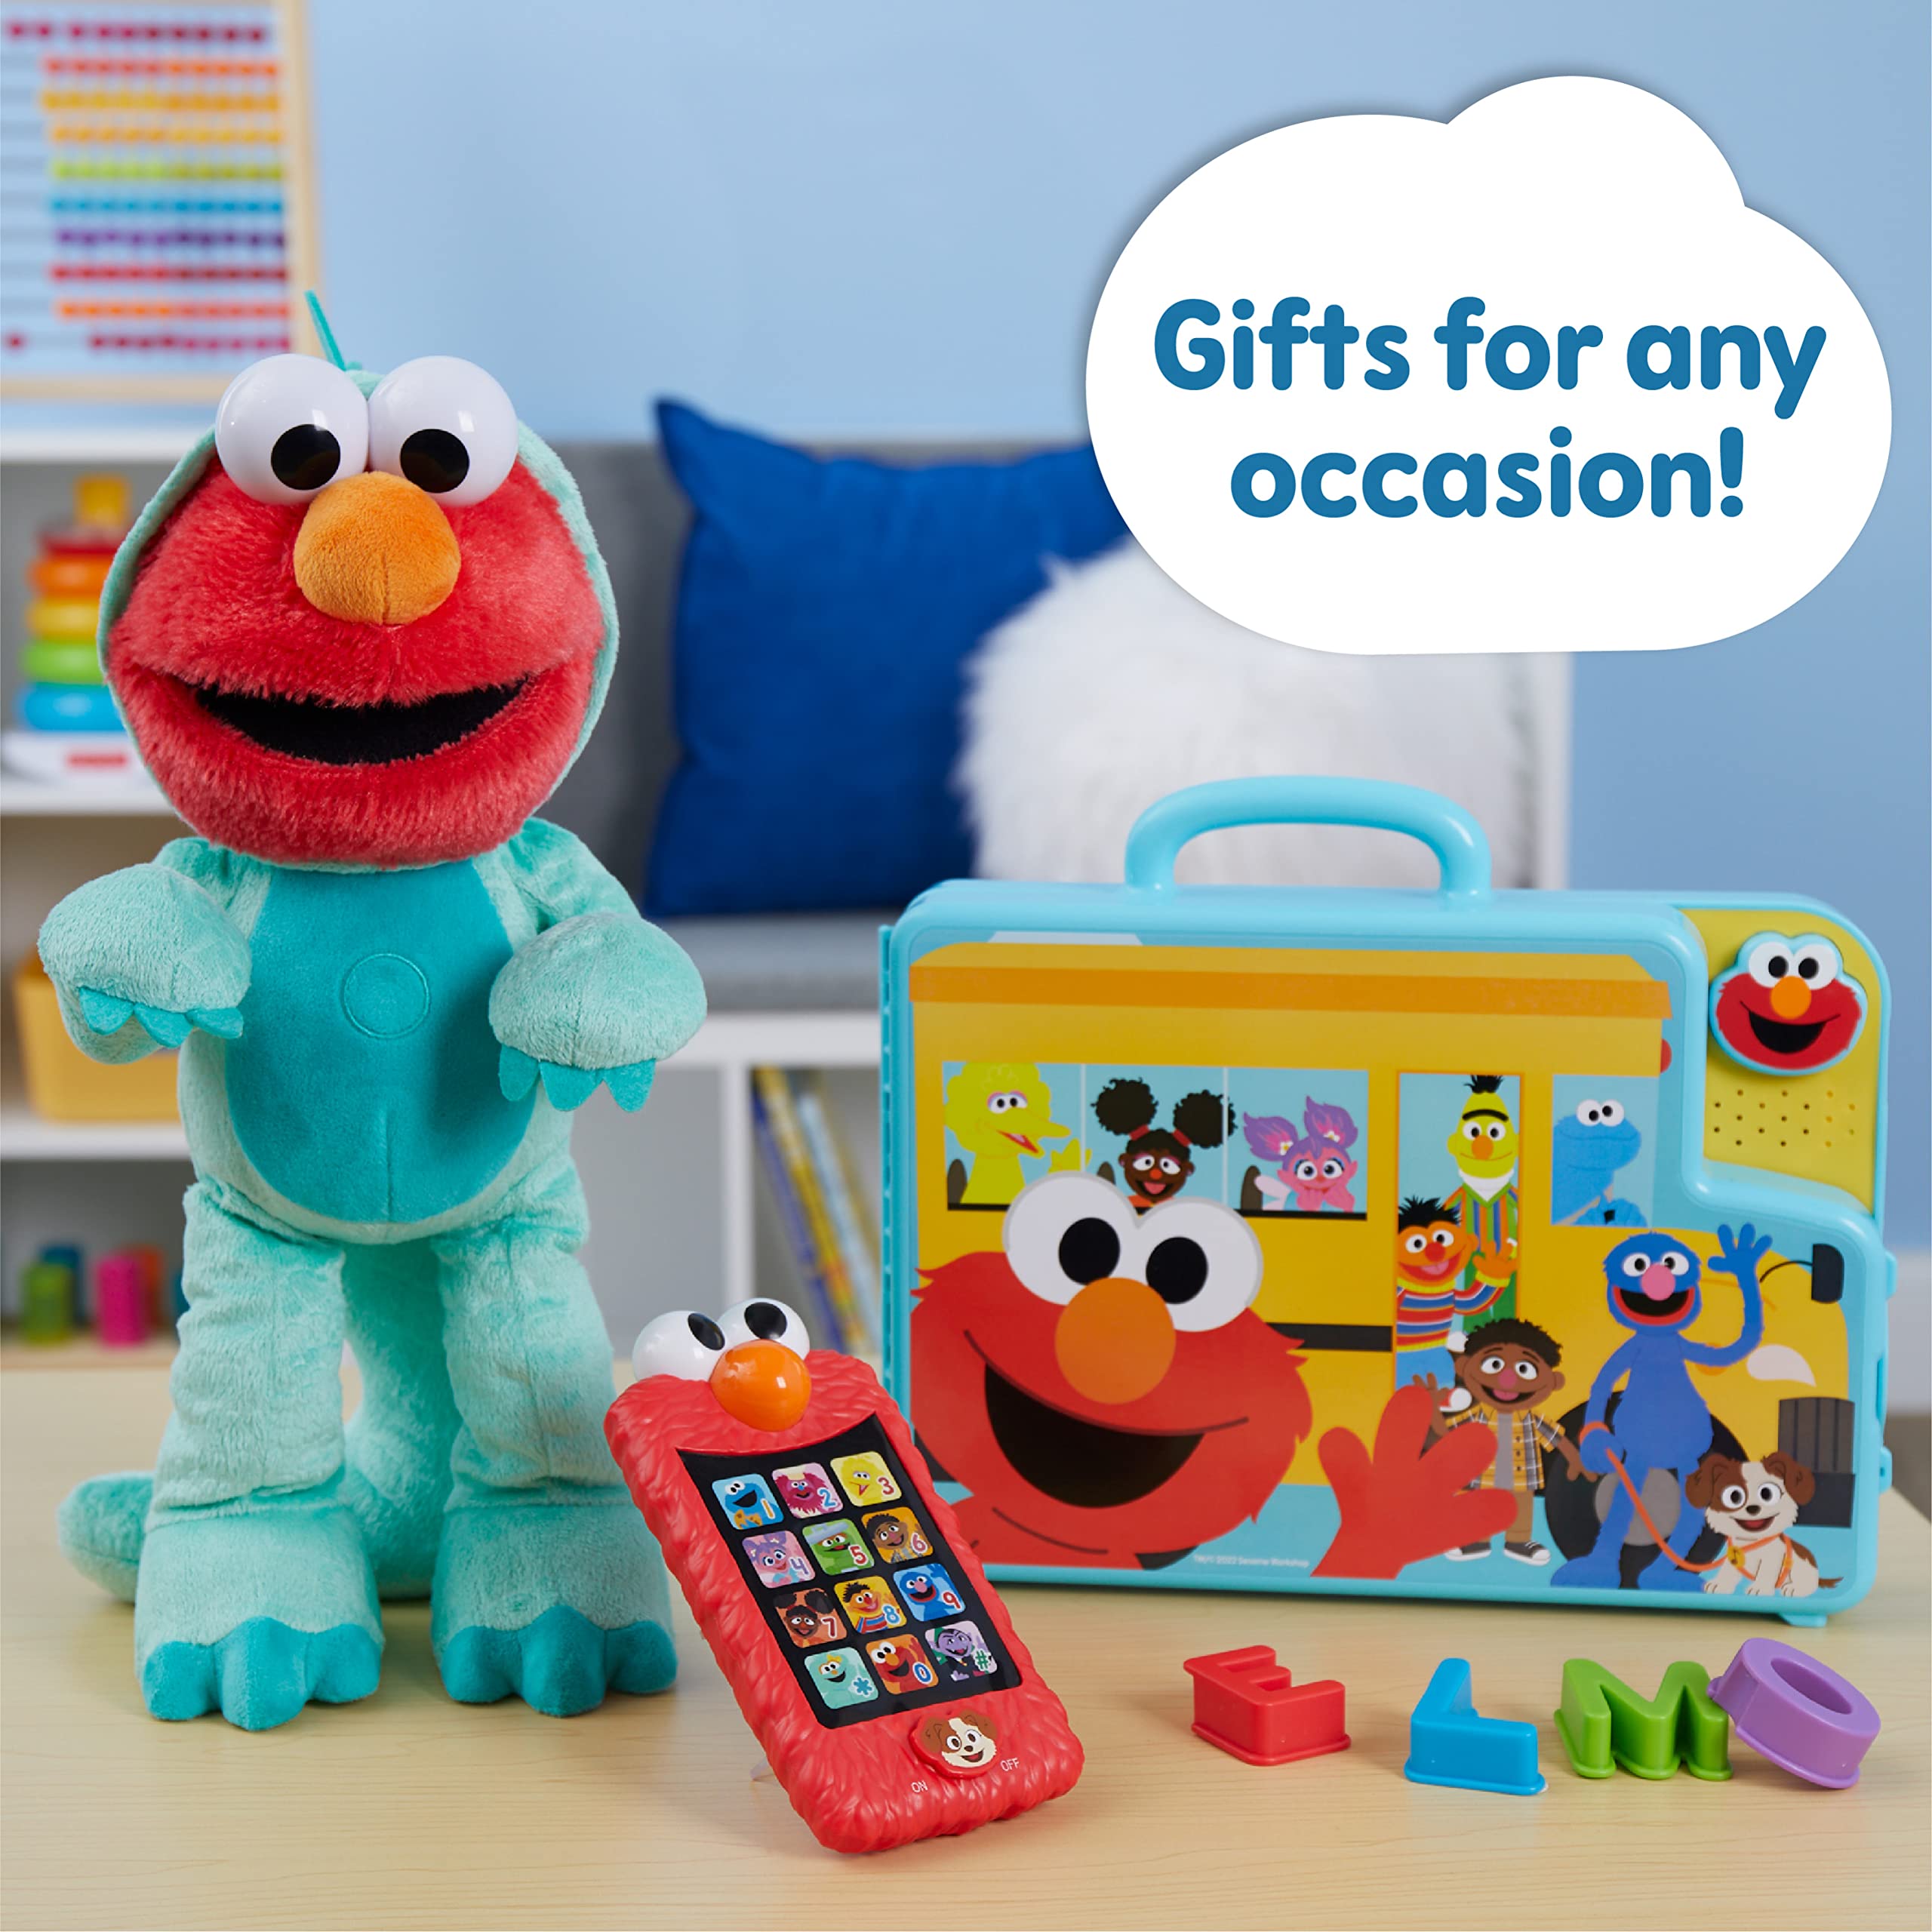 Sesame Street Learn with Elmo Pretend Play Phone, Learning and Education, Officially Licensed Kids Toys for Ages 2 Up by Just Play